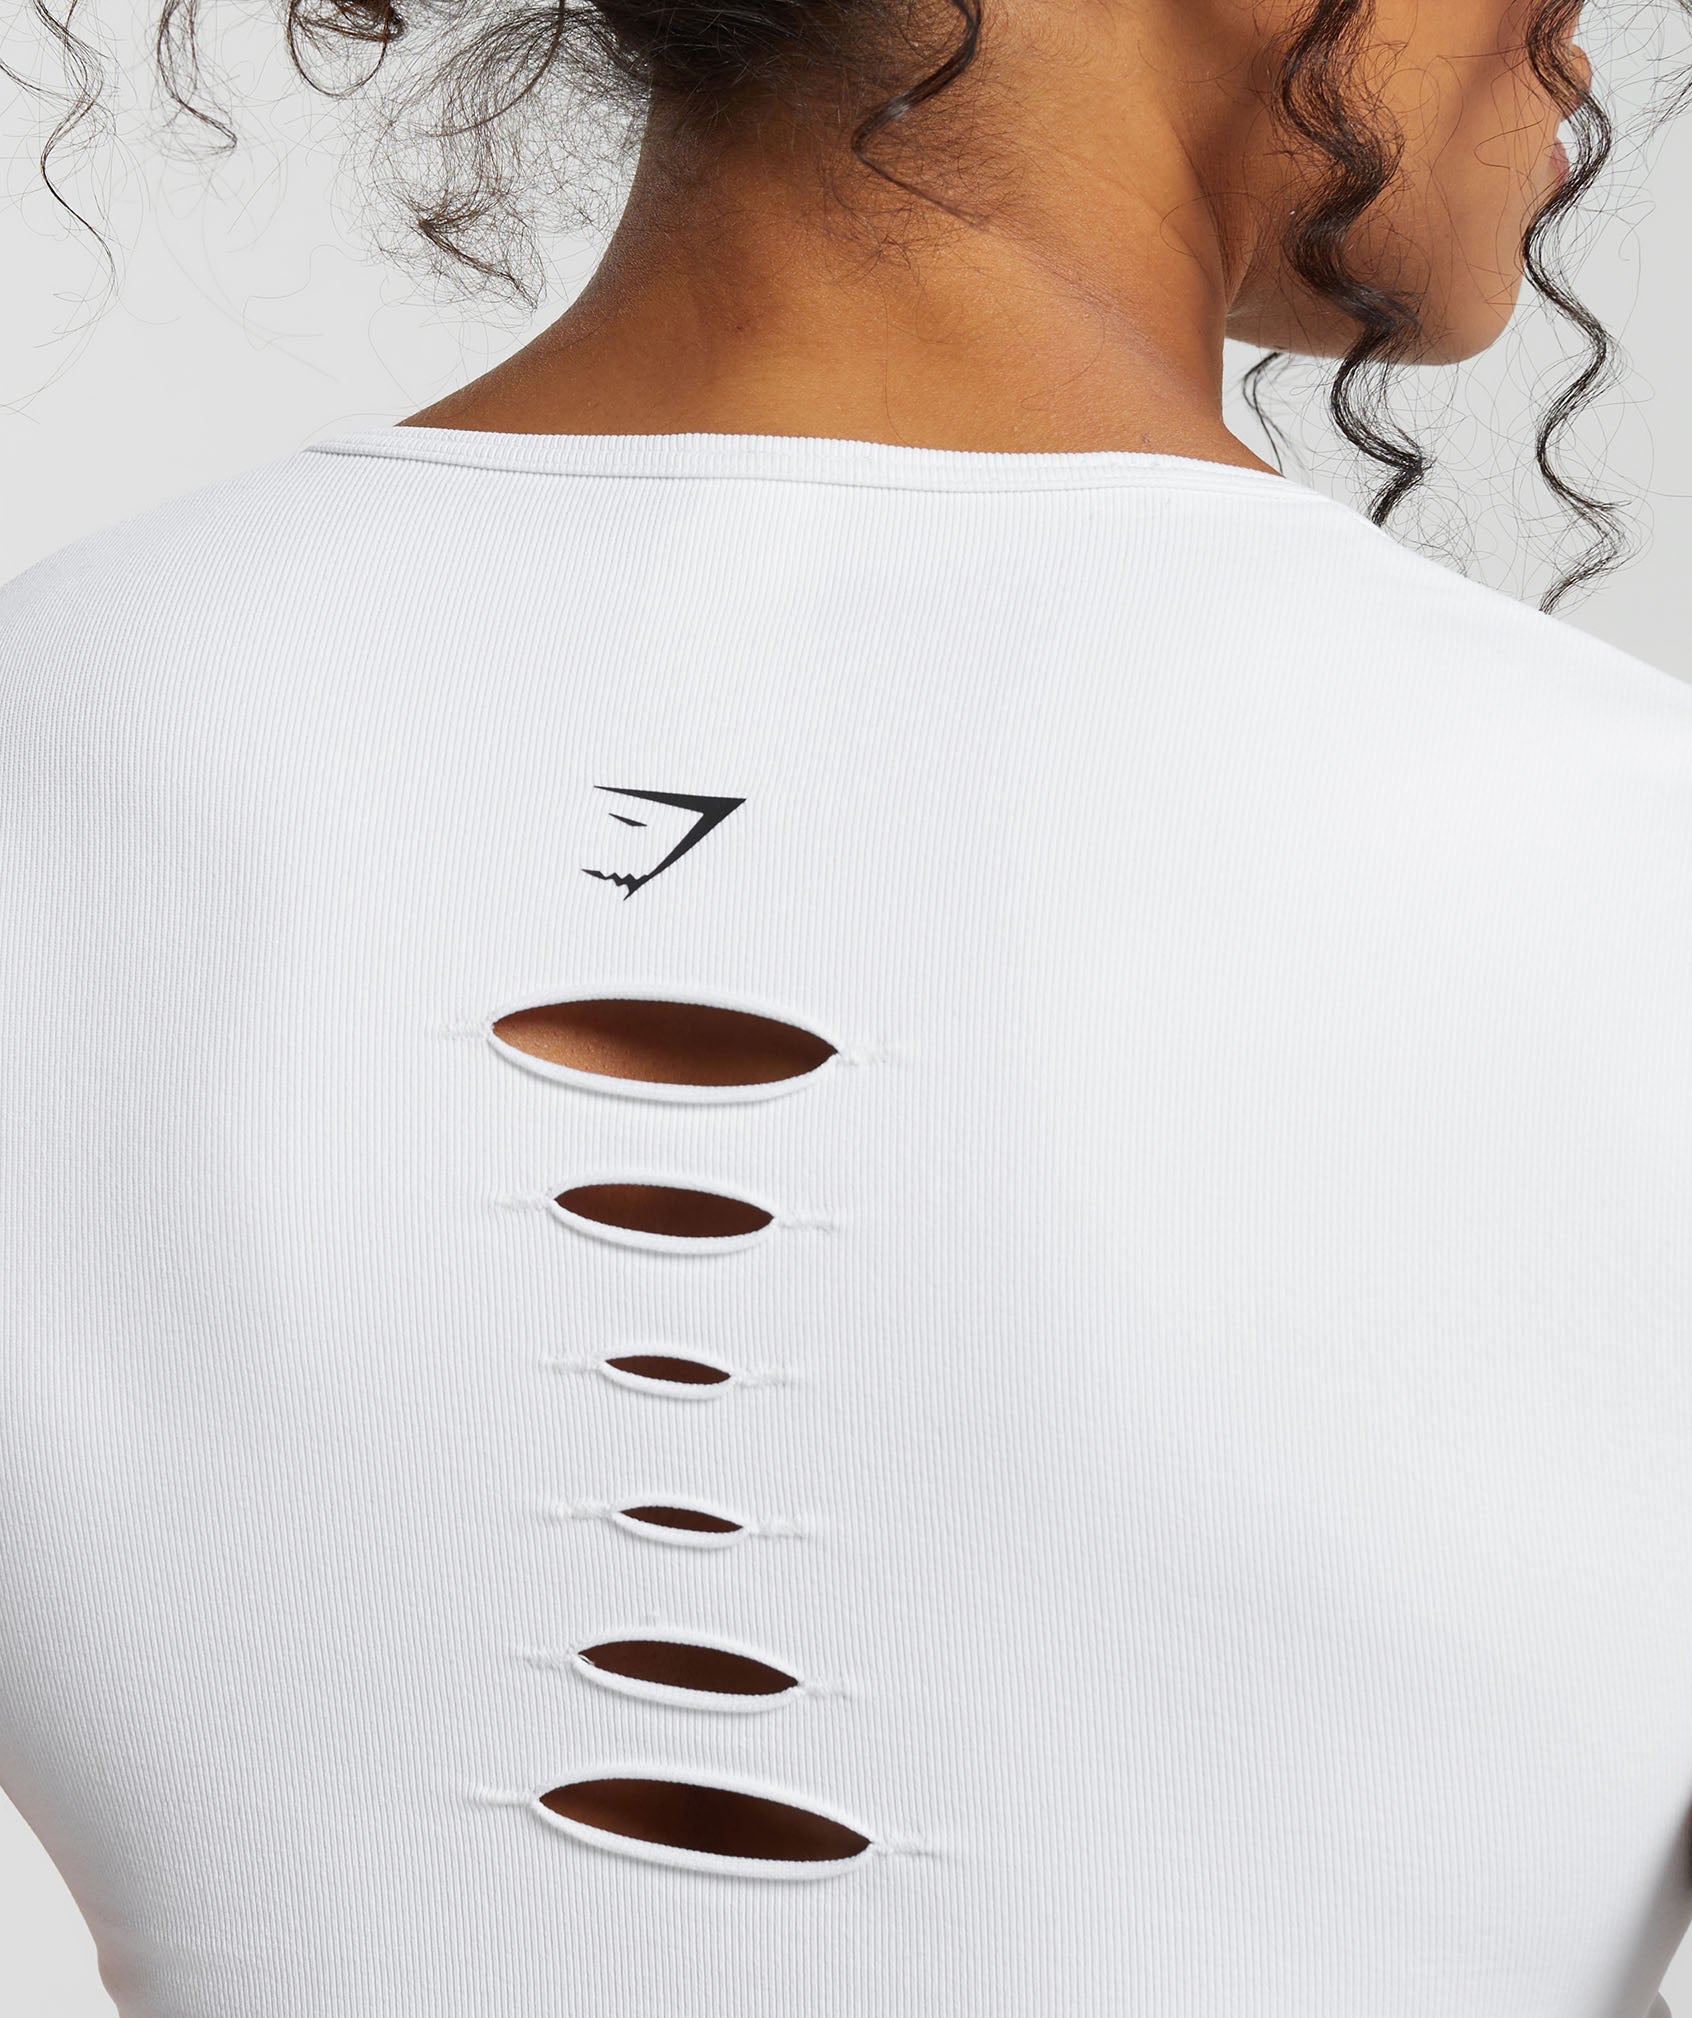 Gains Seamless Fitted Crop Top in White - view 5